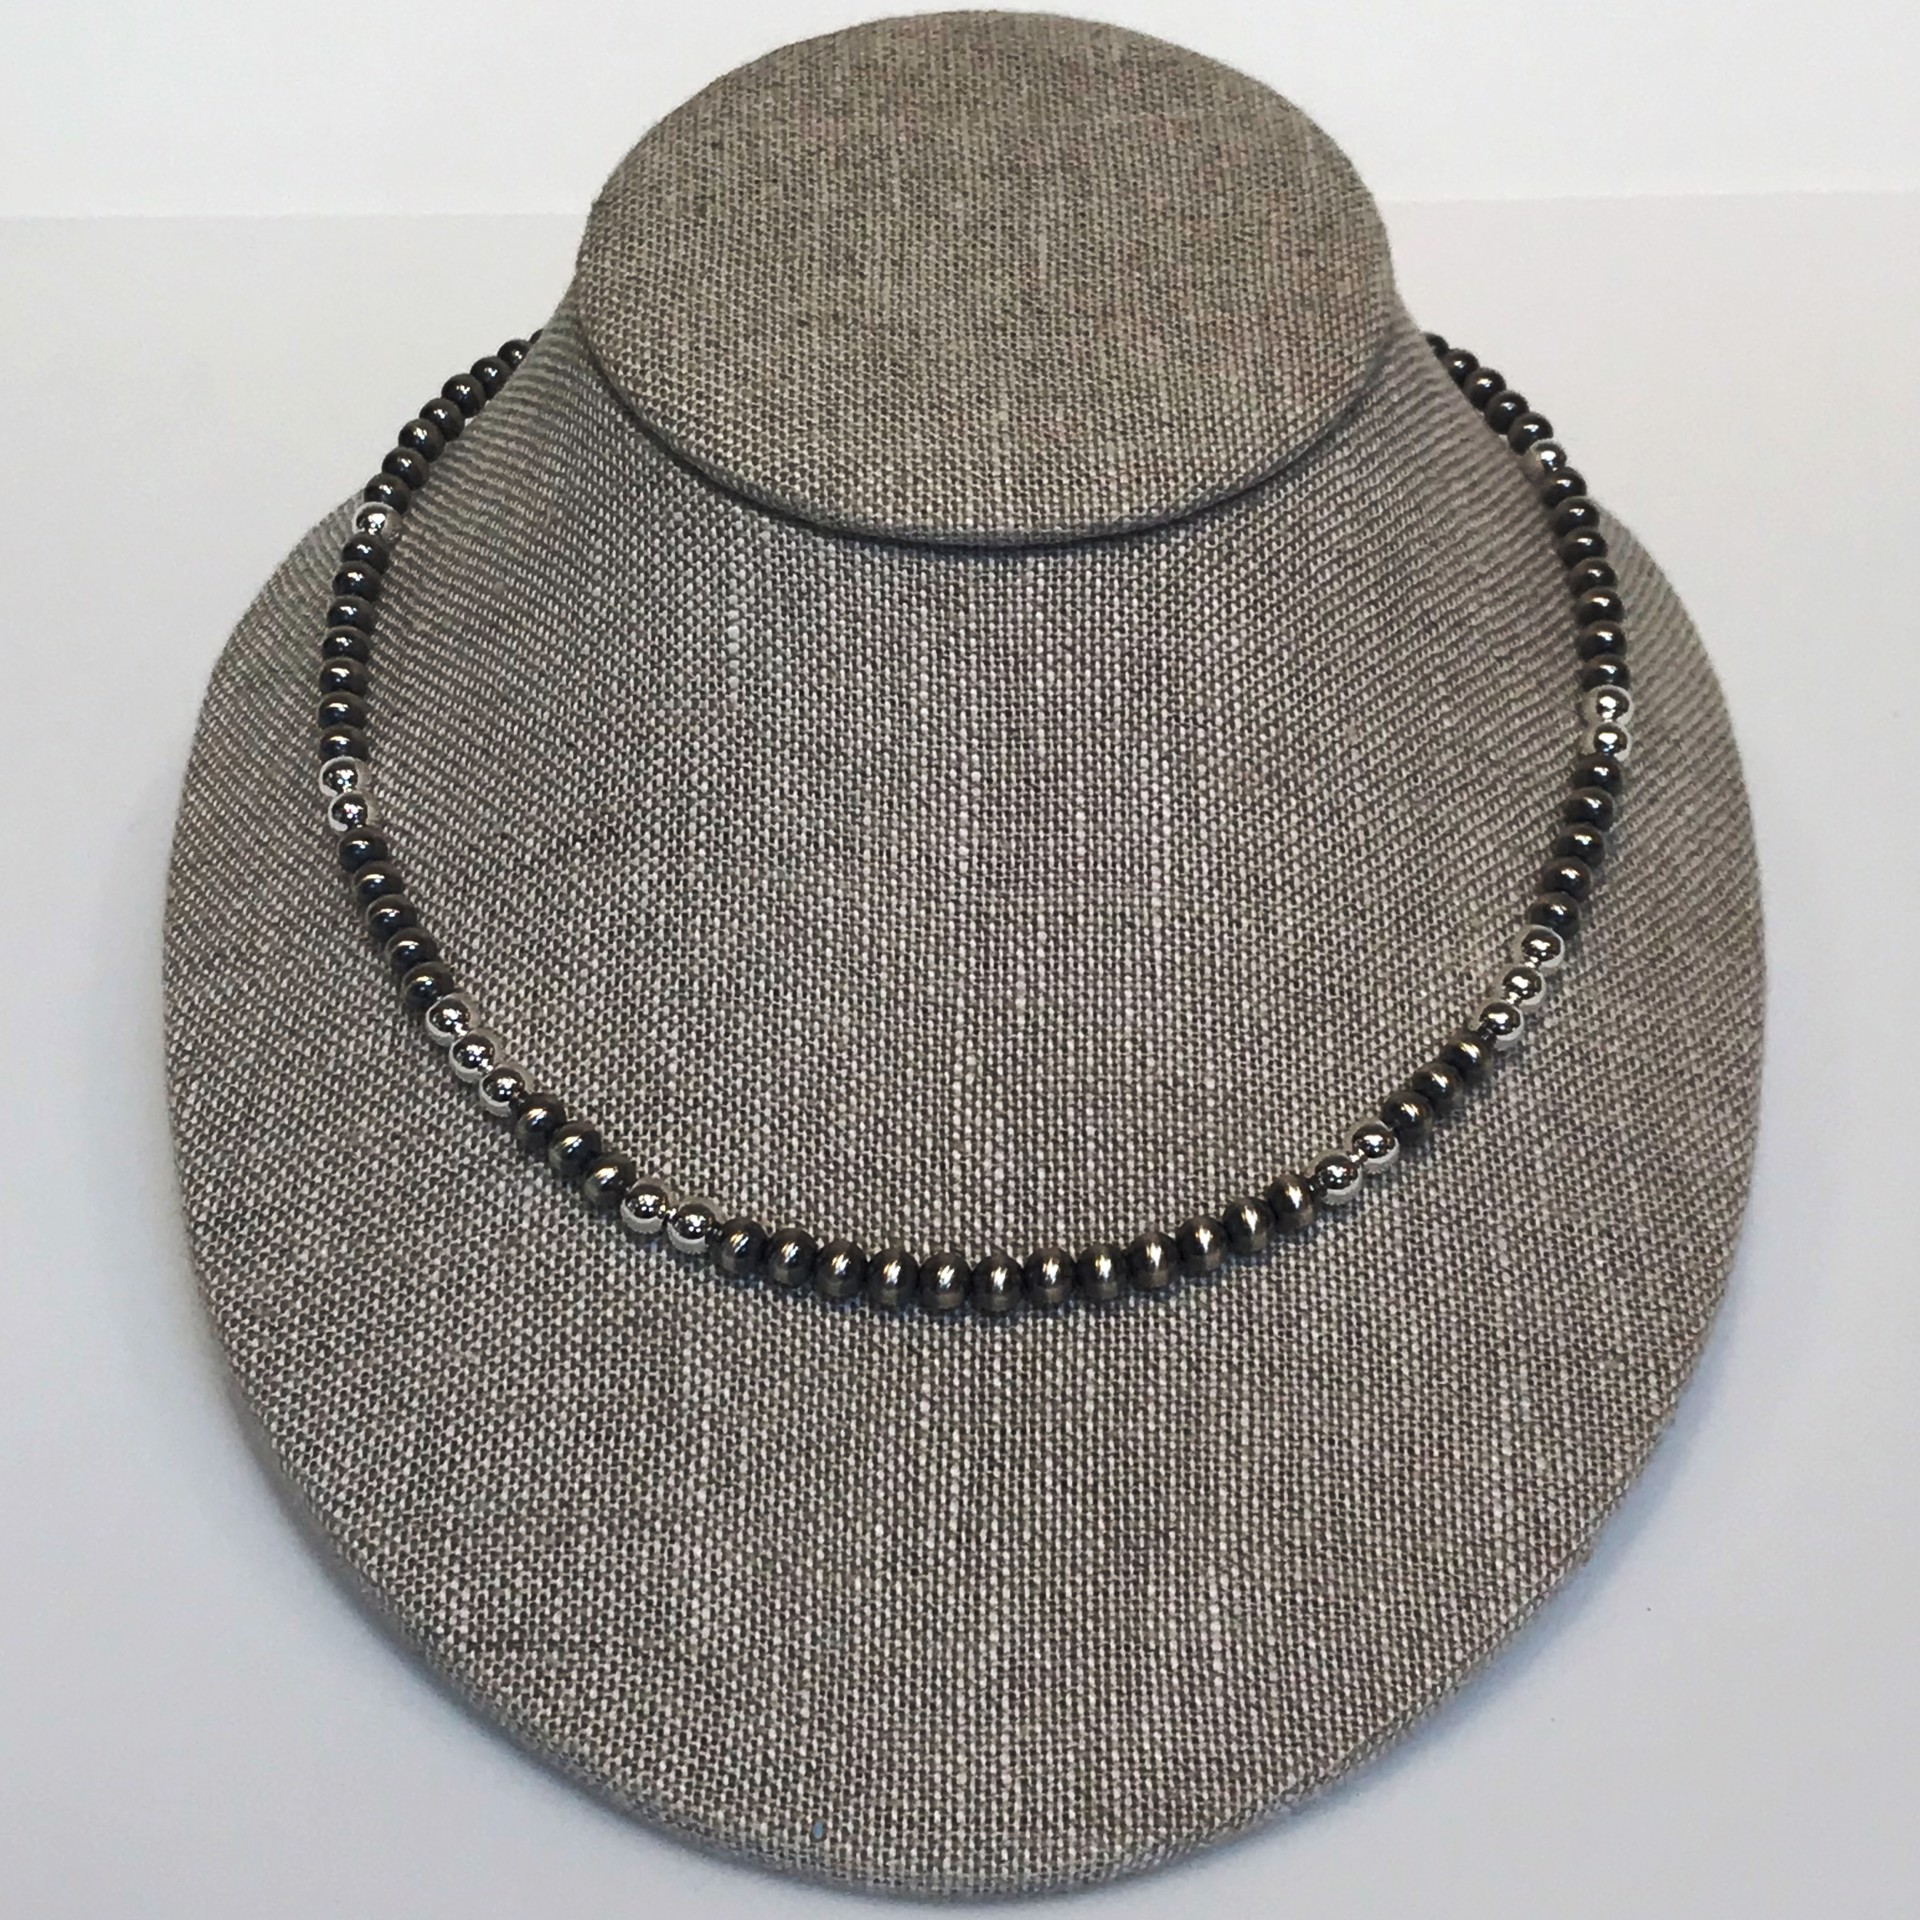 17" Necklace Oxidized Sterling Silver with Sterling Silver 5 mm Beads by Suzanne Woodworth